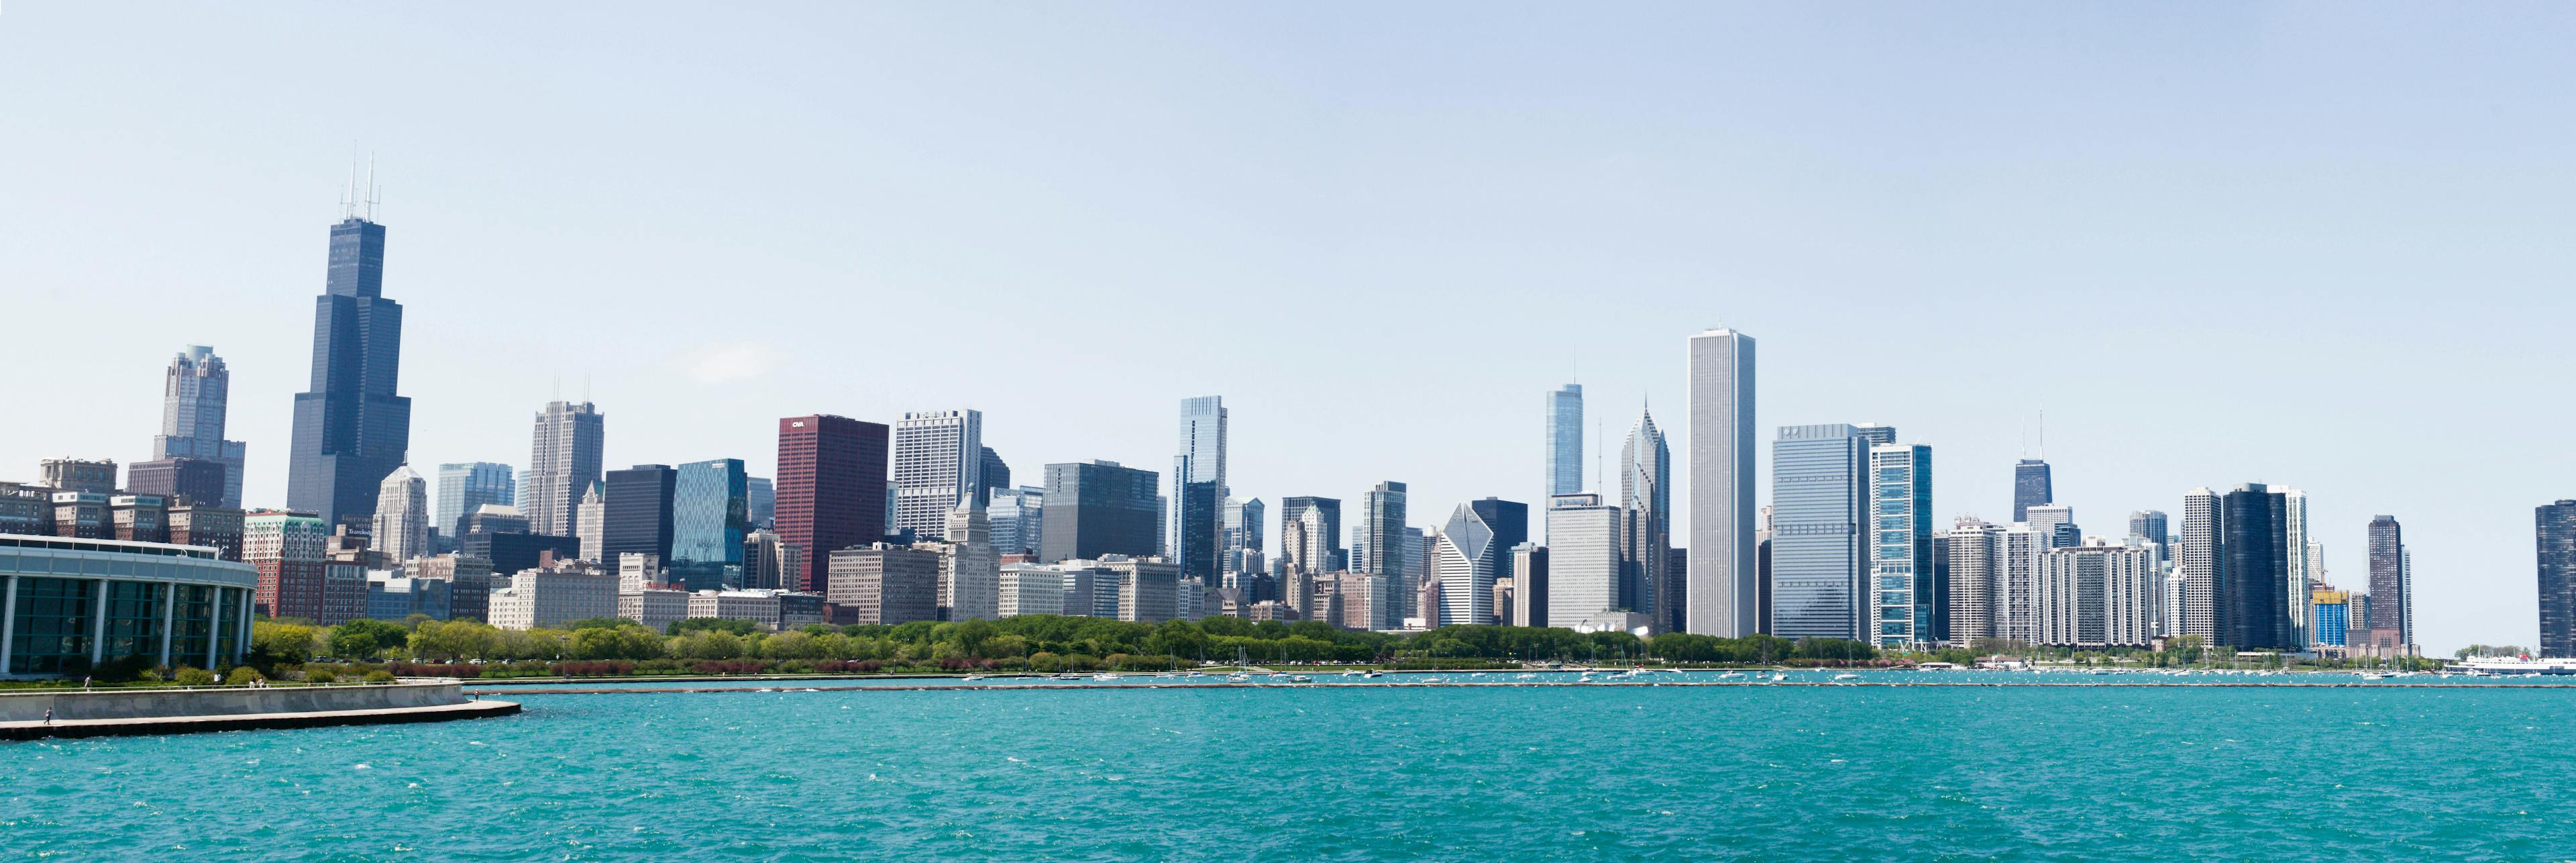 Panorama of the Chicago skyline, from the perspective of the Adler Planetarium, overlooking Lake Michigan